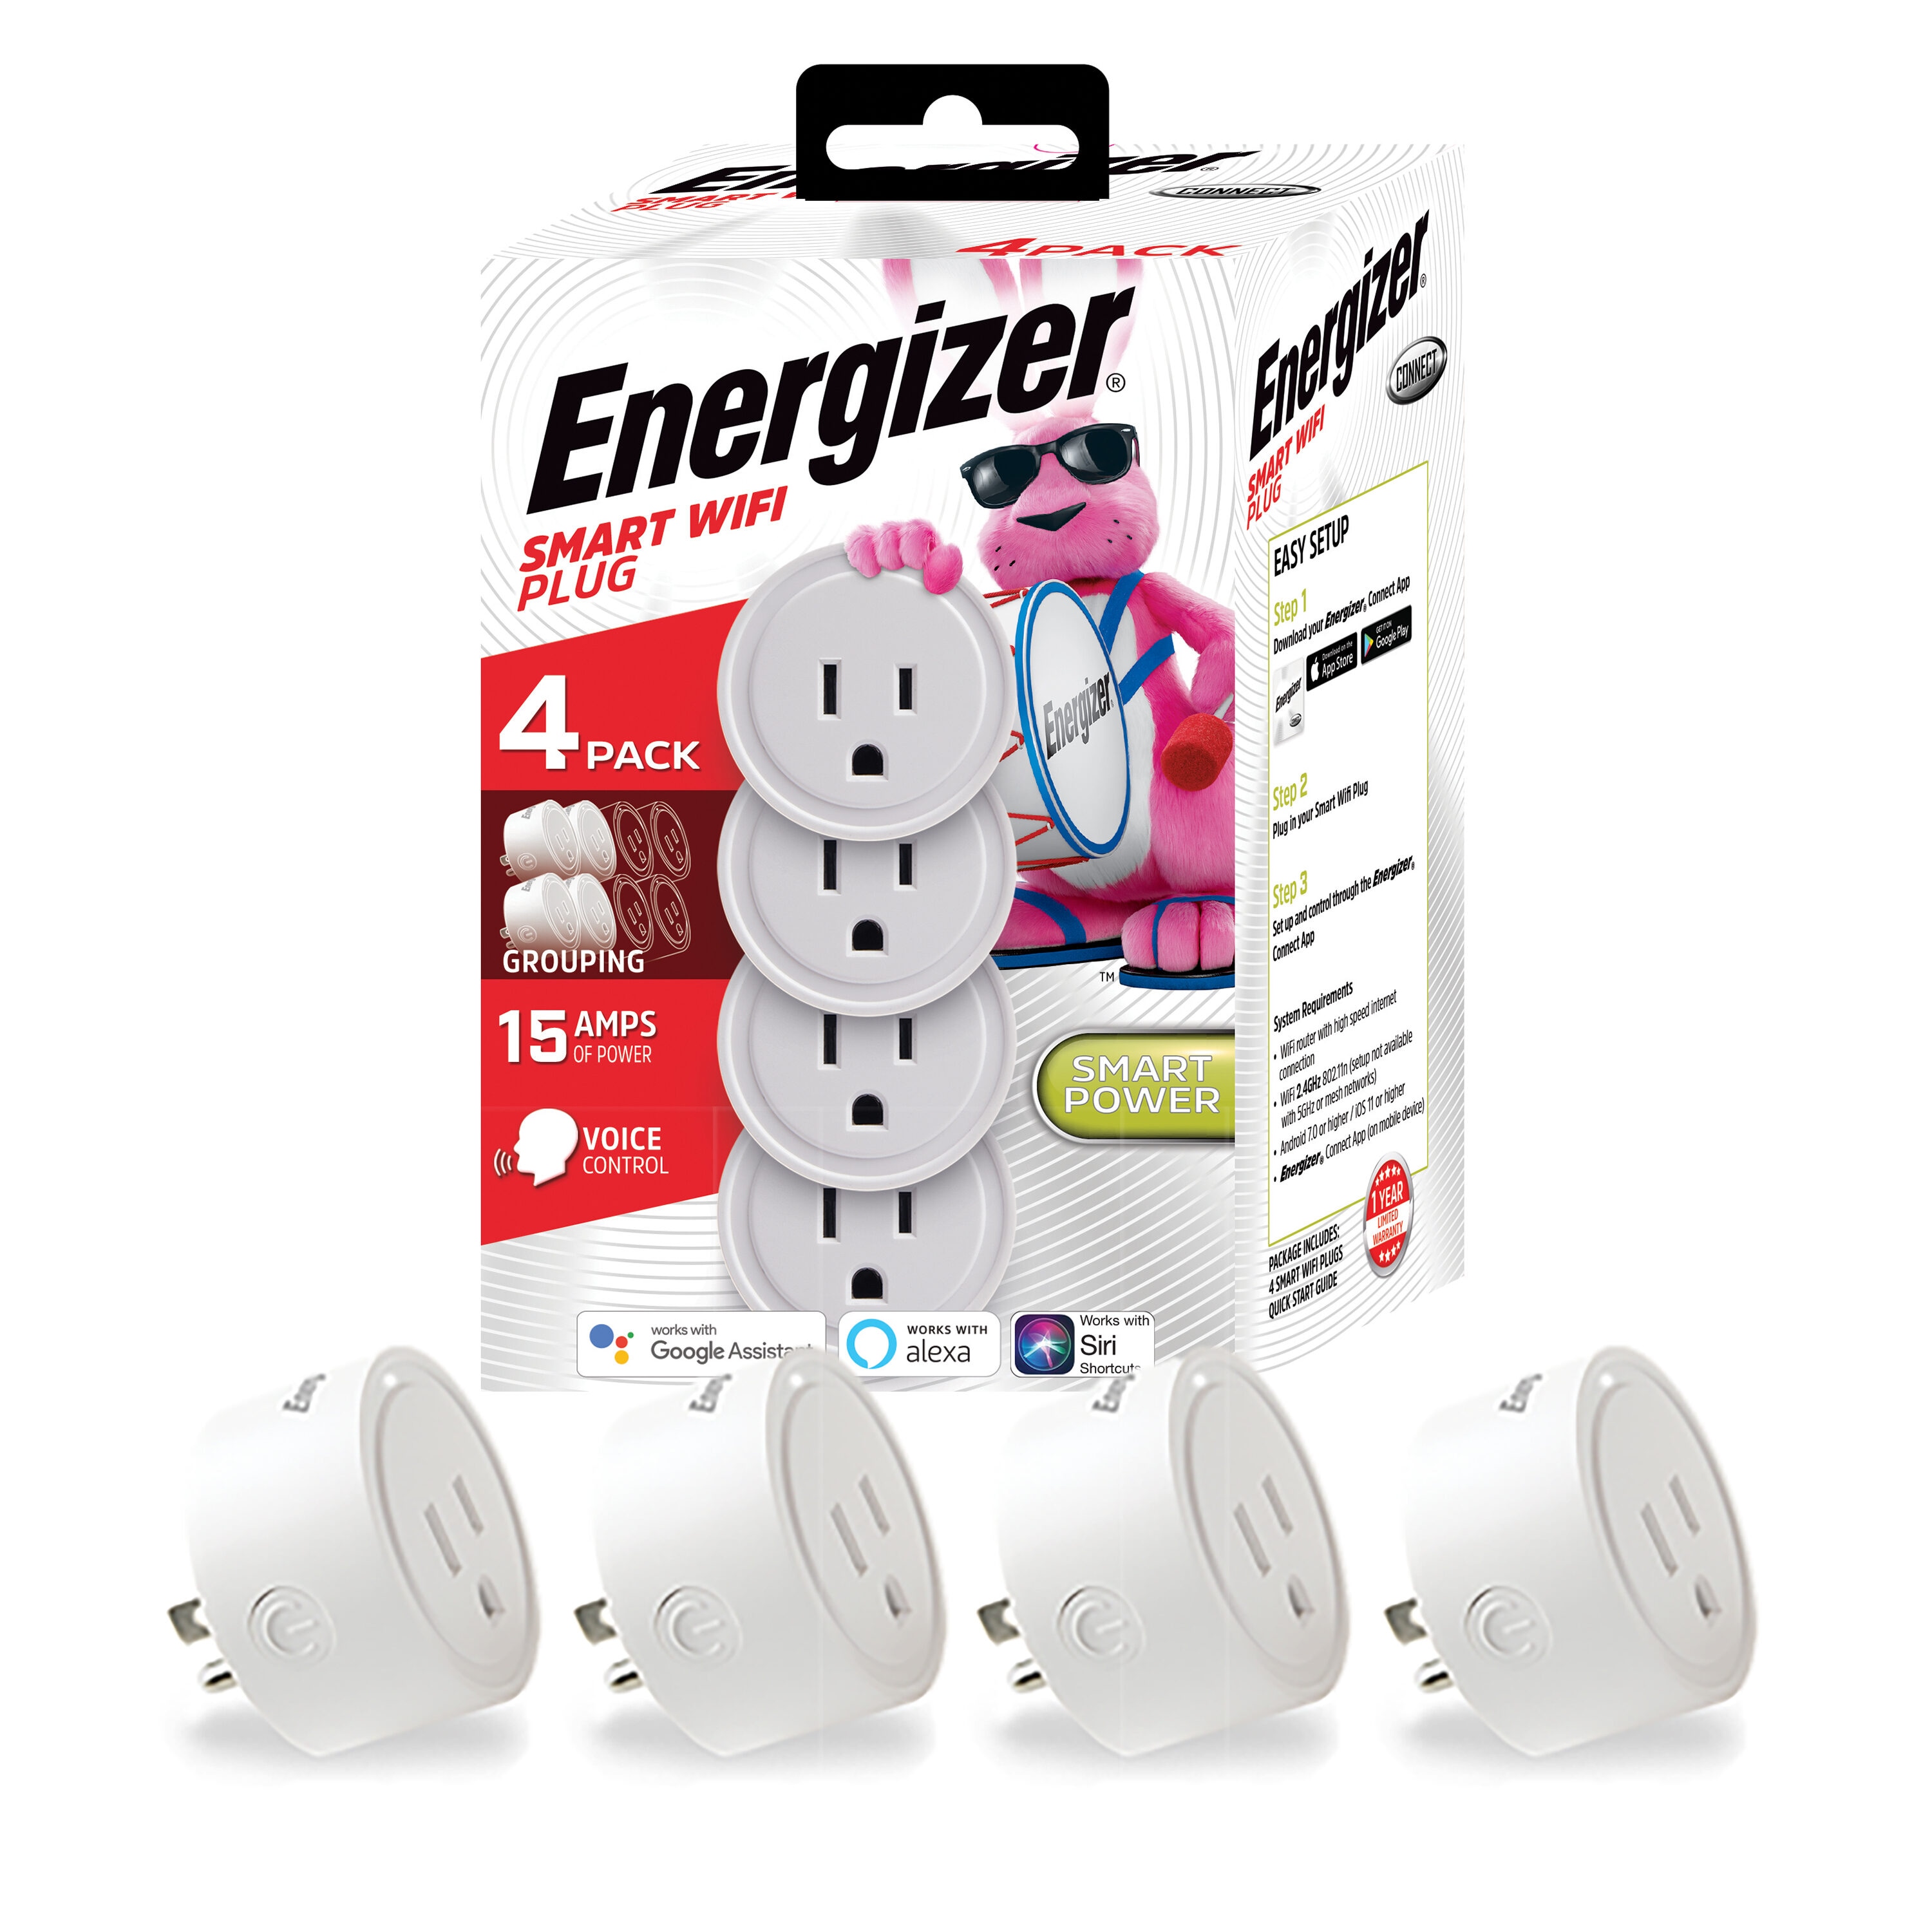 Enbrighten WiFi Micro Smart Plug - White (Pack of 4) for sale online